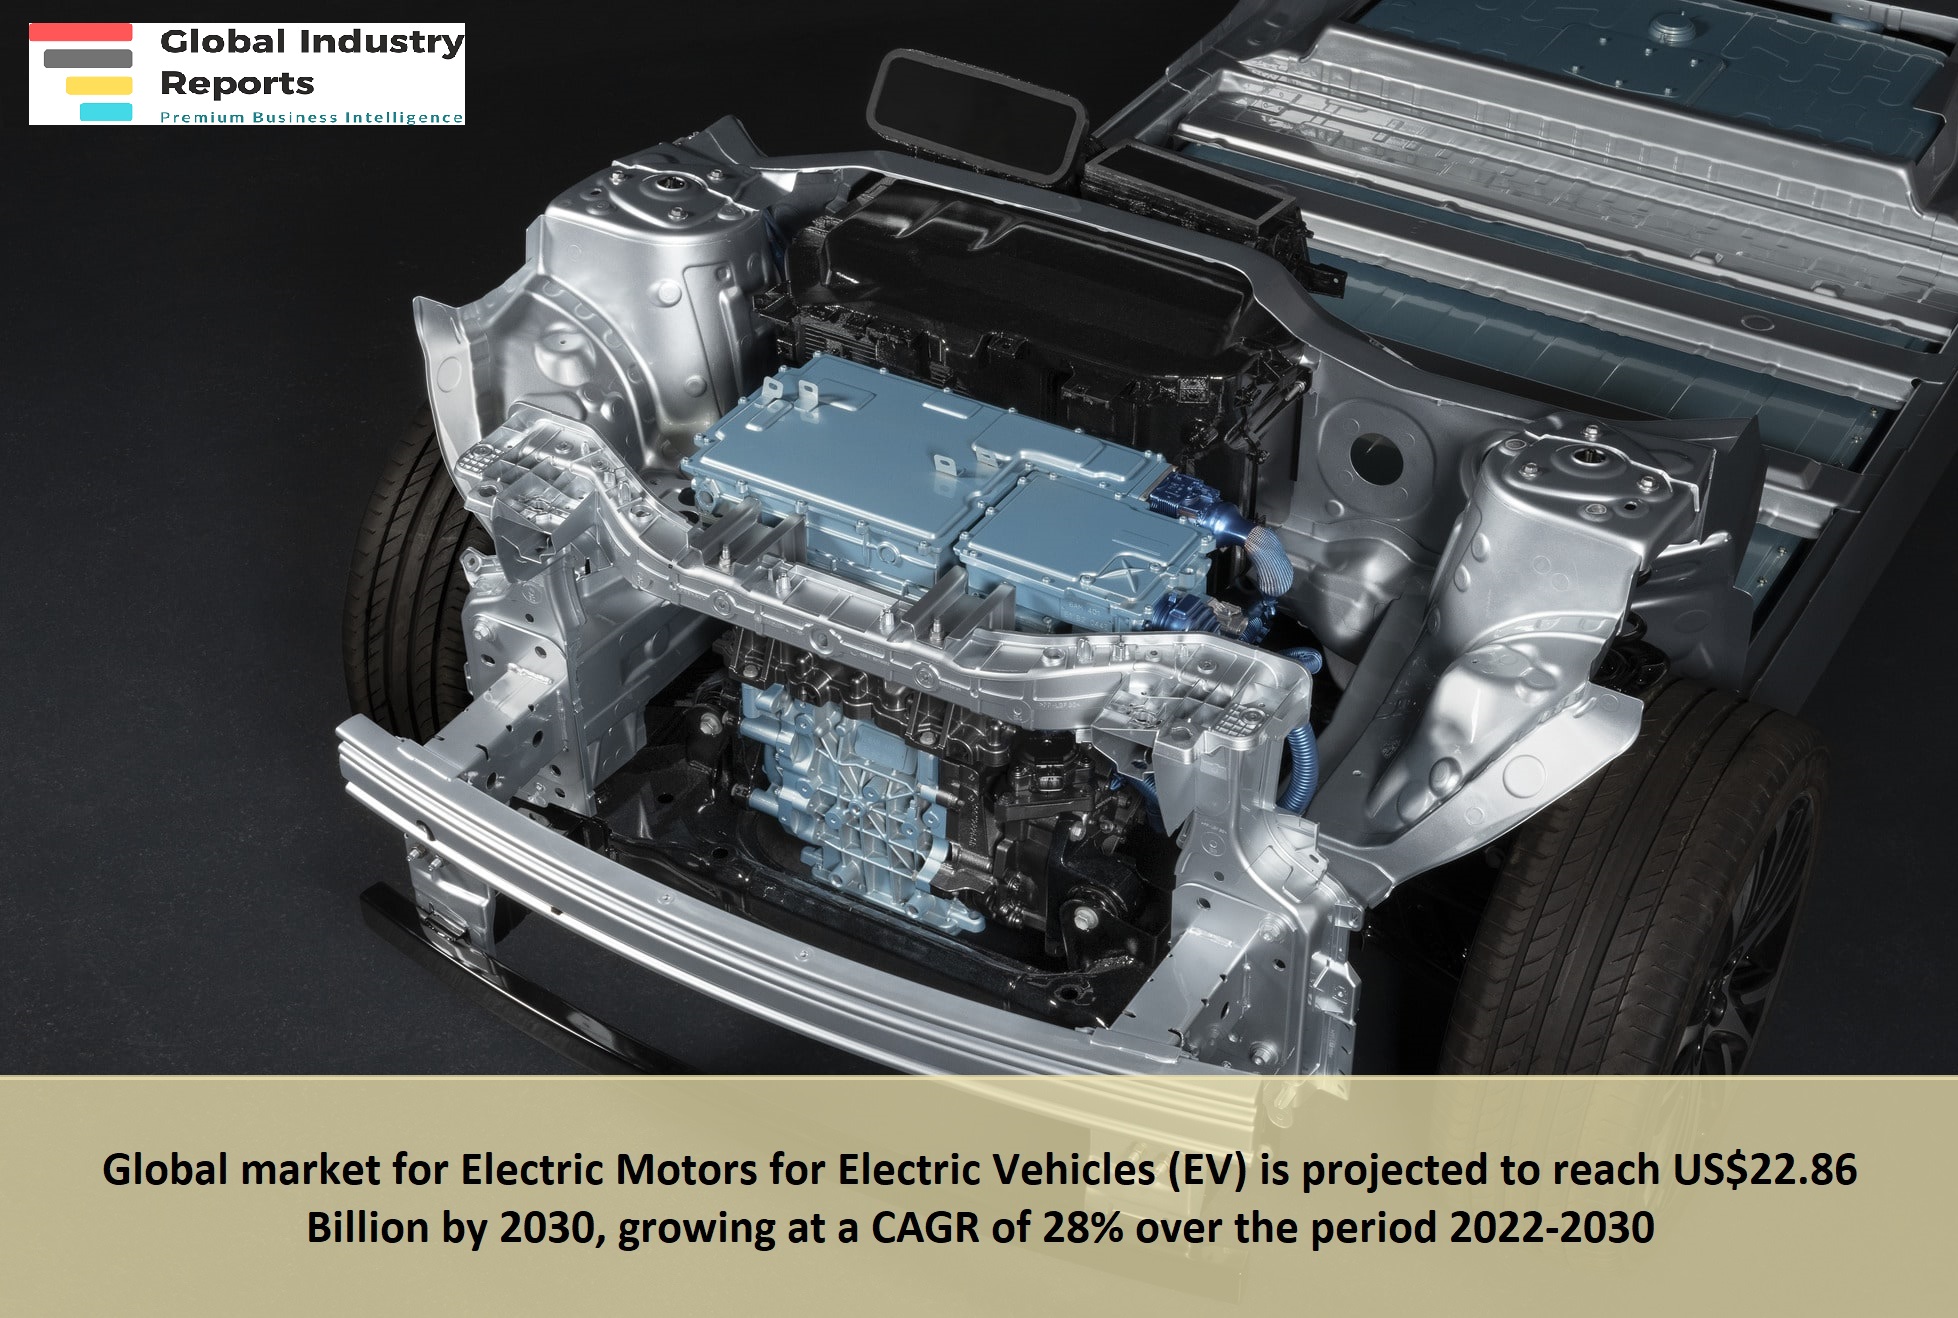 Electric Motors for Electric Vehicles Market